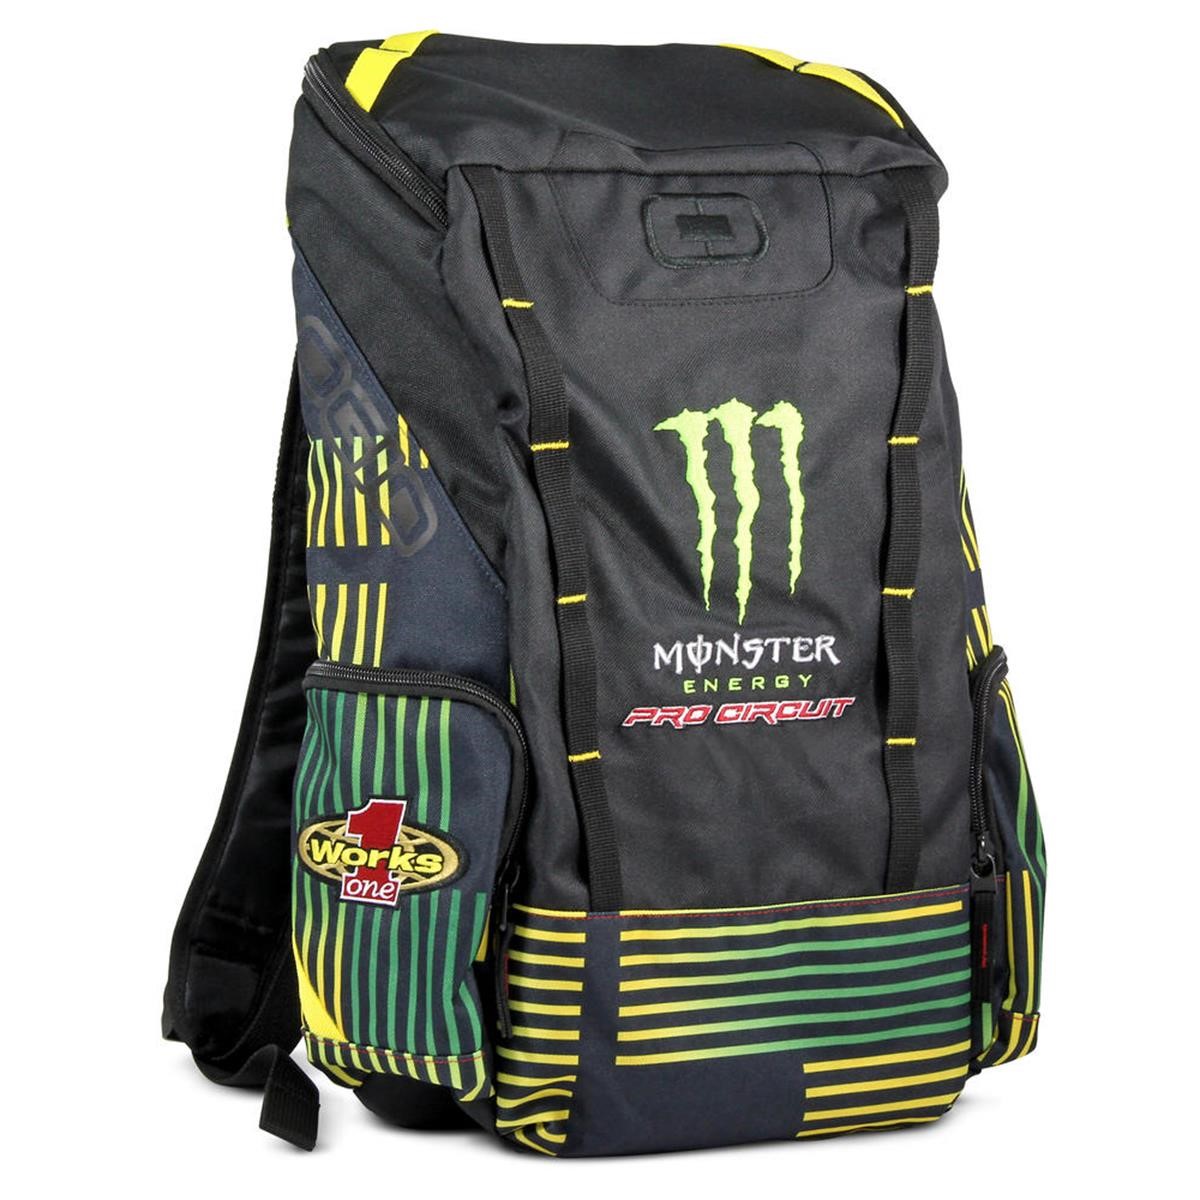 Pro Circuit Backpack Event Monster - Black/Green